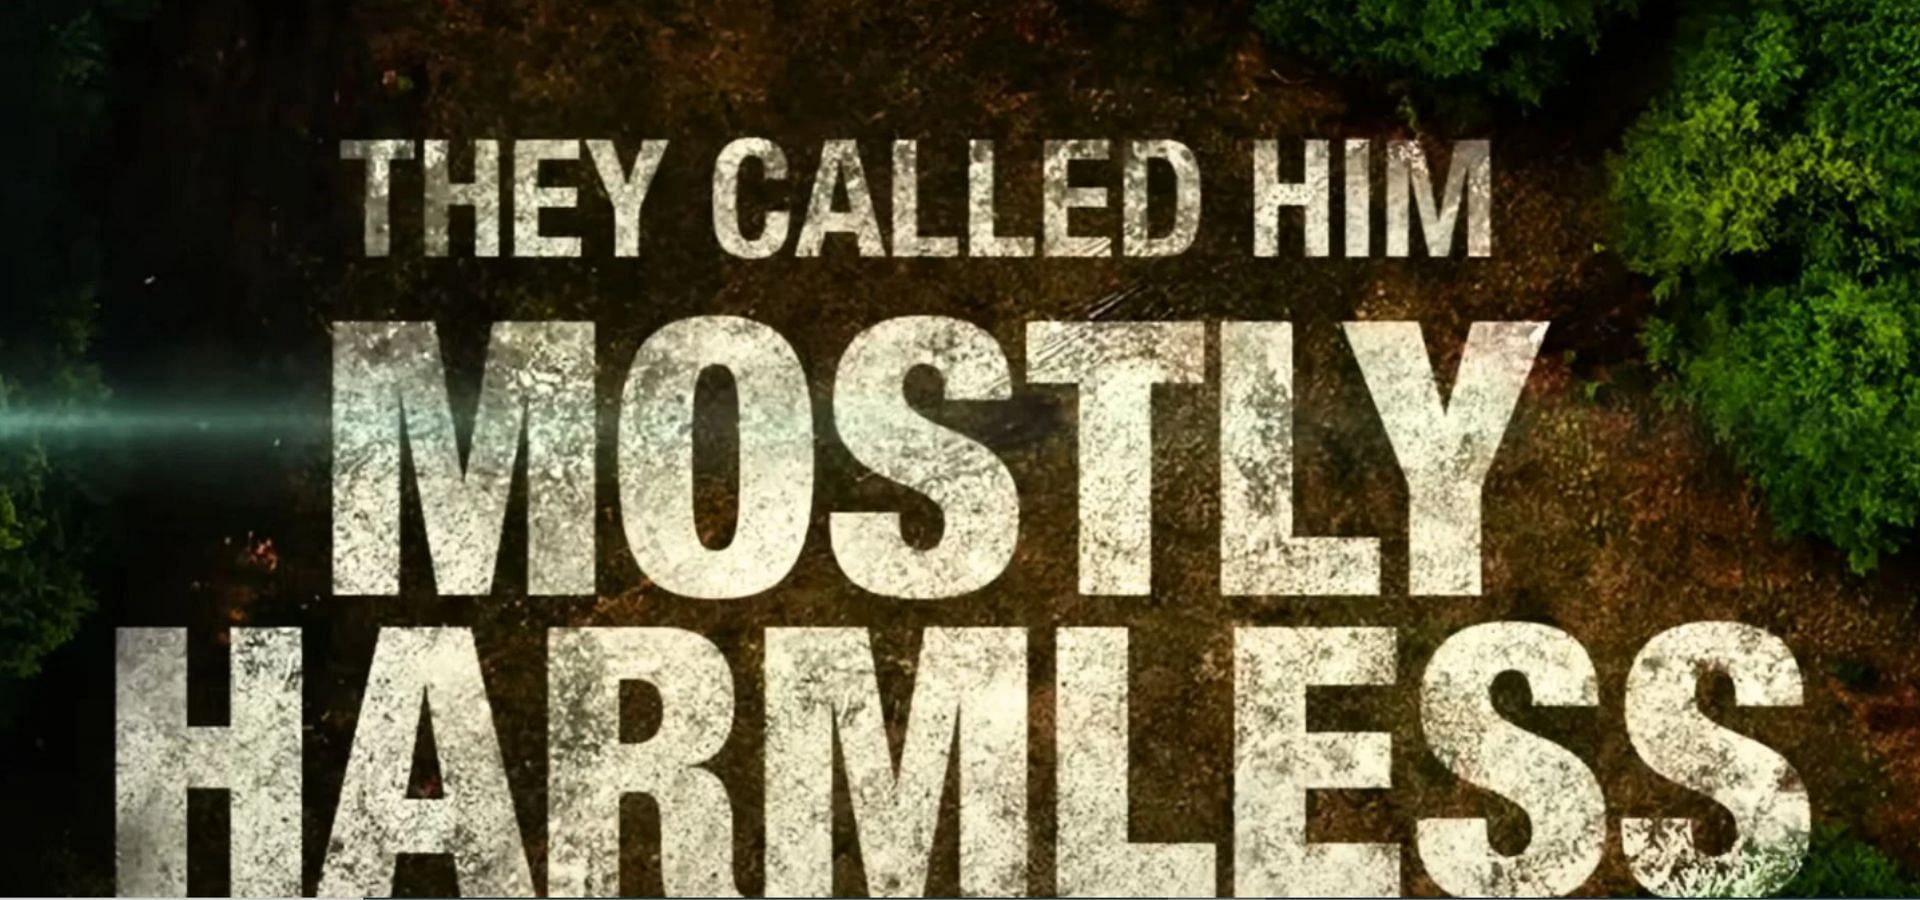 The Called Him Mostly Harmless was Vance Rodriguez (Image via HBO)